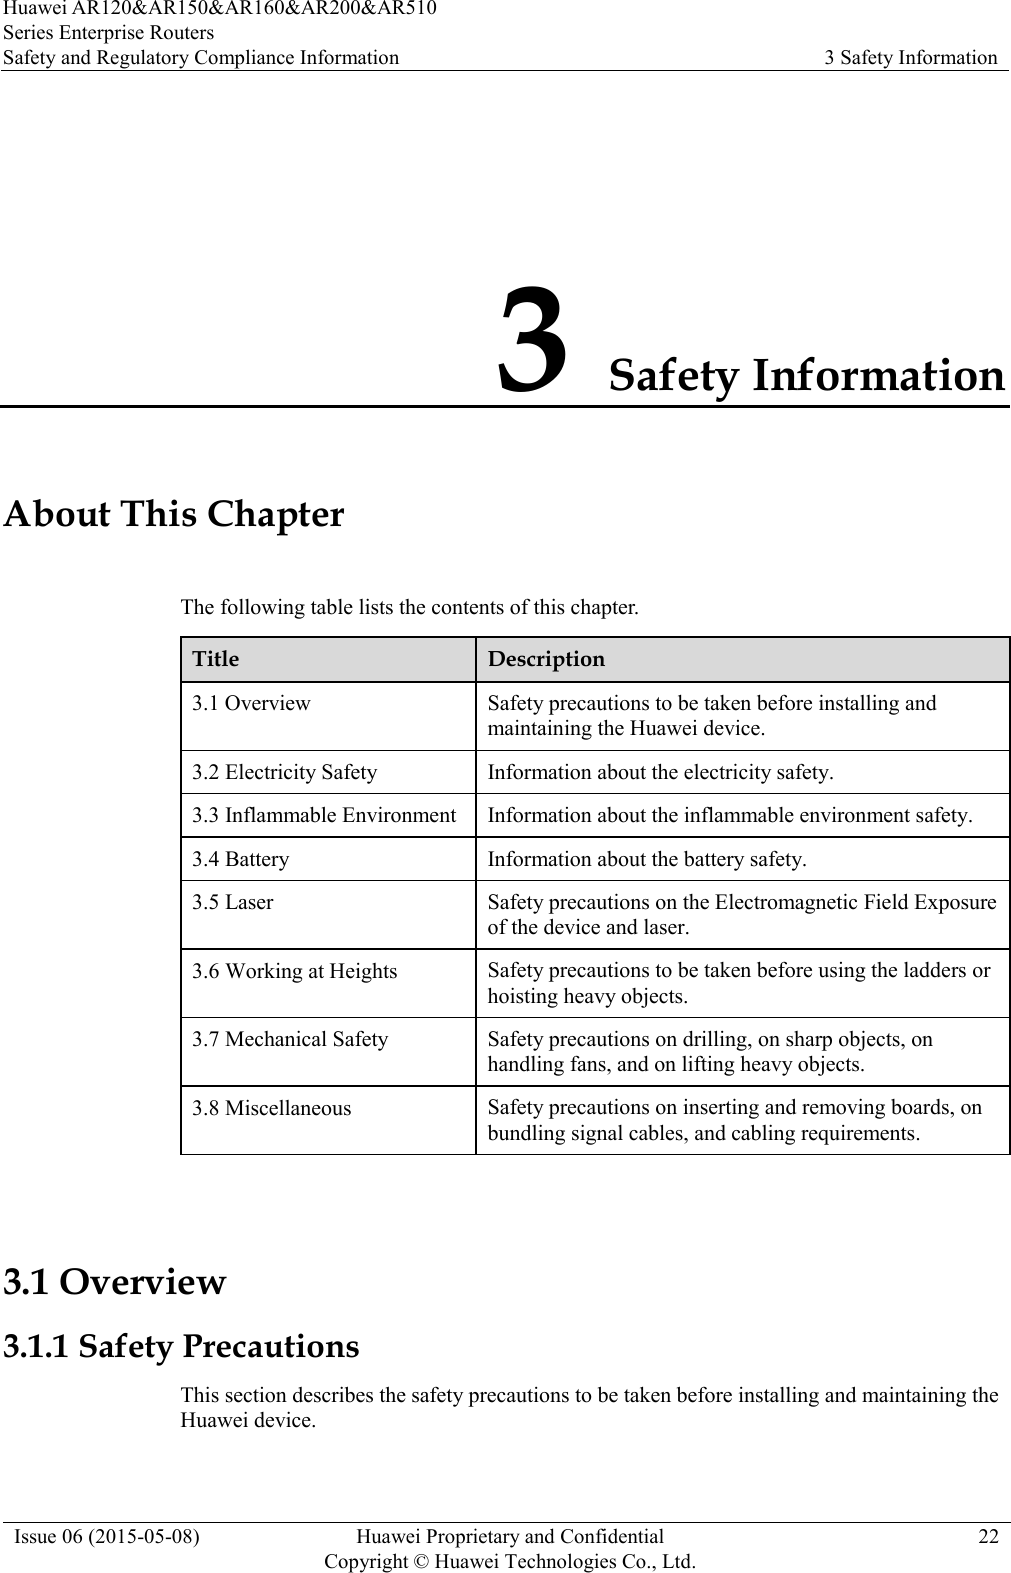 Huawei AR120&amp;AR150&amp;AR160&amp;AR200&amp;AR510 Series Enterprise Routers Safety and Regulatory Compliance Information 3 Safety Information  Issue 06 (2015-05-08) Huawei Proprietary and Confidential           Copyright © Huawei Technologies Co., Ltd. 22  3 Safety Information About This Chapter The following table lists the contents of this chapter. Title Description 3.1 Overview Safety precautions to be taken before installing and maintaining the Huawei device. 3.2 Electricity Safety Information about the electricity safety. 3.3 Inflammable Environment Information about the inflammable environment safety. 3.4 Battery Information about the battery safety. 3.5 Laser Safety precautions on the Electromagnetic Field Exposure of the device and laser. 3.6 Working at Heights Safety precautions to be taken before using the ladders or hoisting heavy objects. 3.7 Mechanical Safety Safety precautions on drilling, on sharp objects, on handling fans, and on lifting heavy objects. 3.8 Miscellaneous Safety precautions on inserting and removing boards, on bundling signal cables, and cabling requirements.  3.1 Overview 3.1.1 Safety Precautions This section describes the safety precautions to be taken before installing and maintaining the Huawei device. 